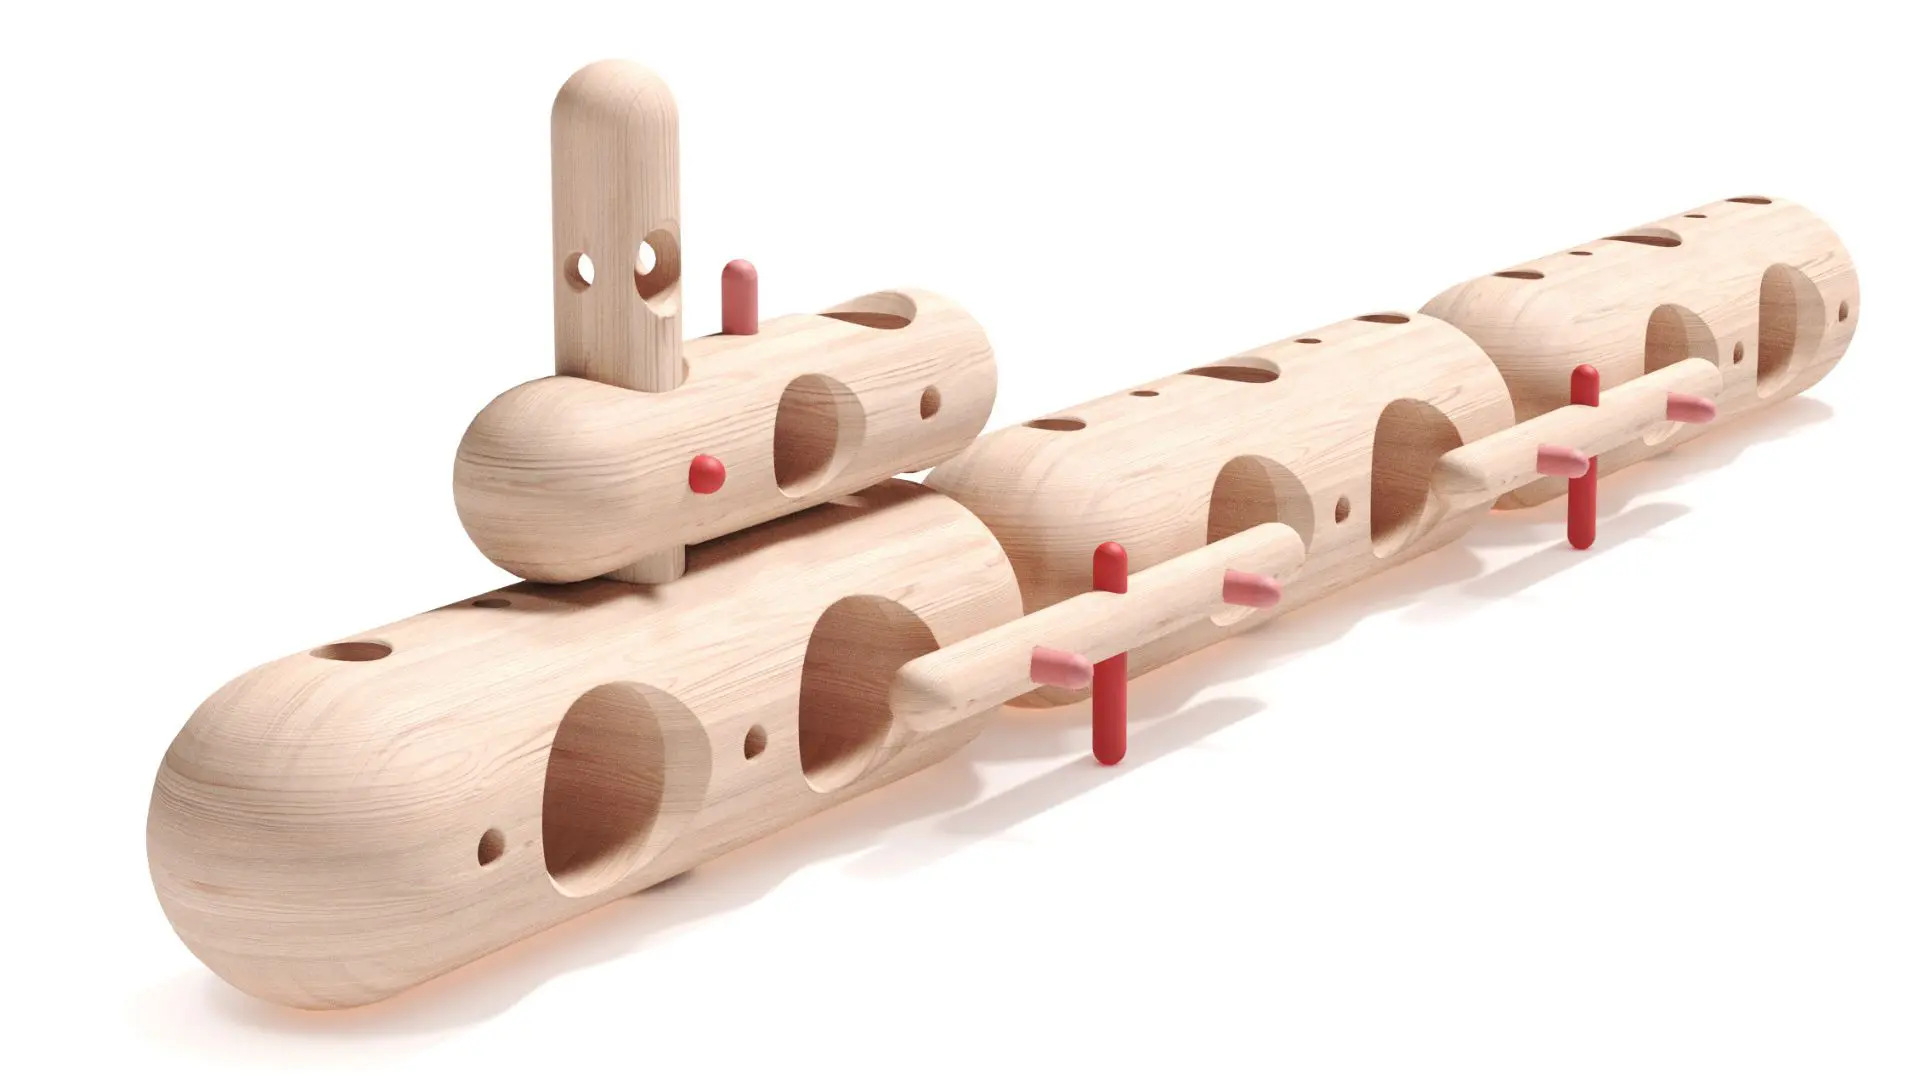 Konstrukta _ wooden toys _ education and collectibles - Cover